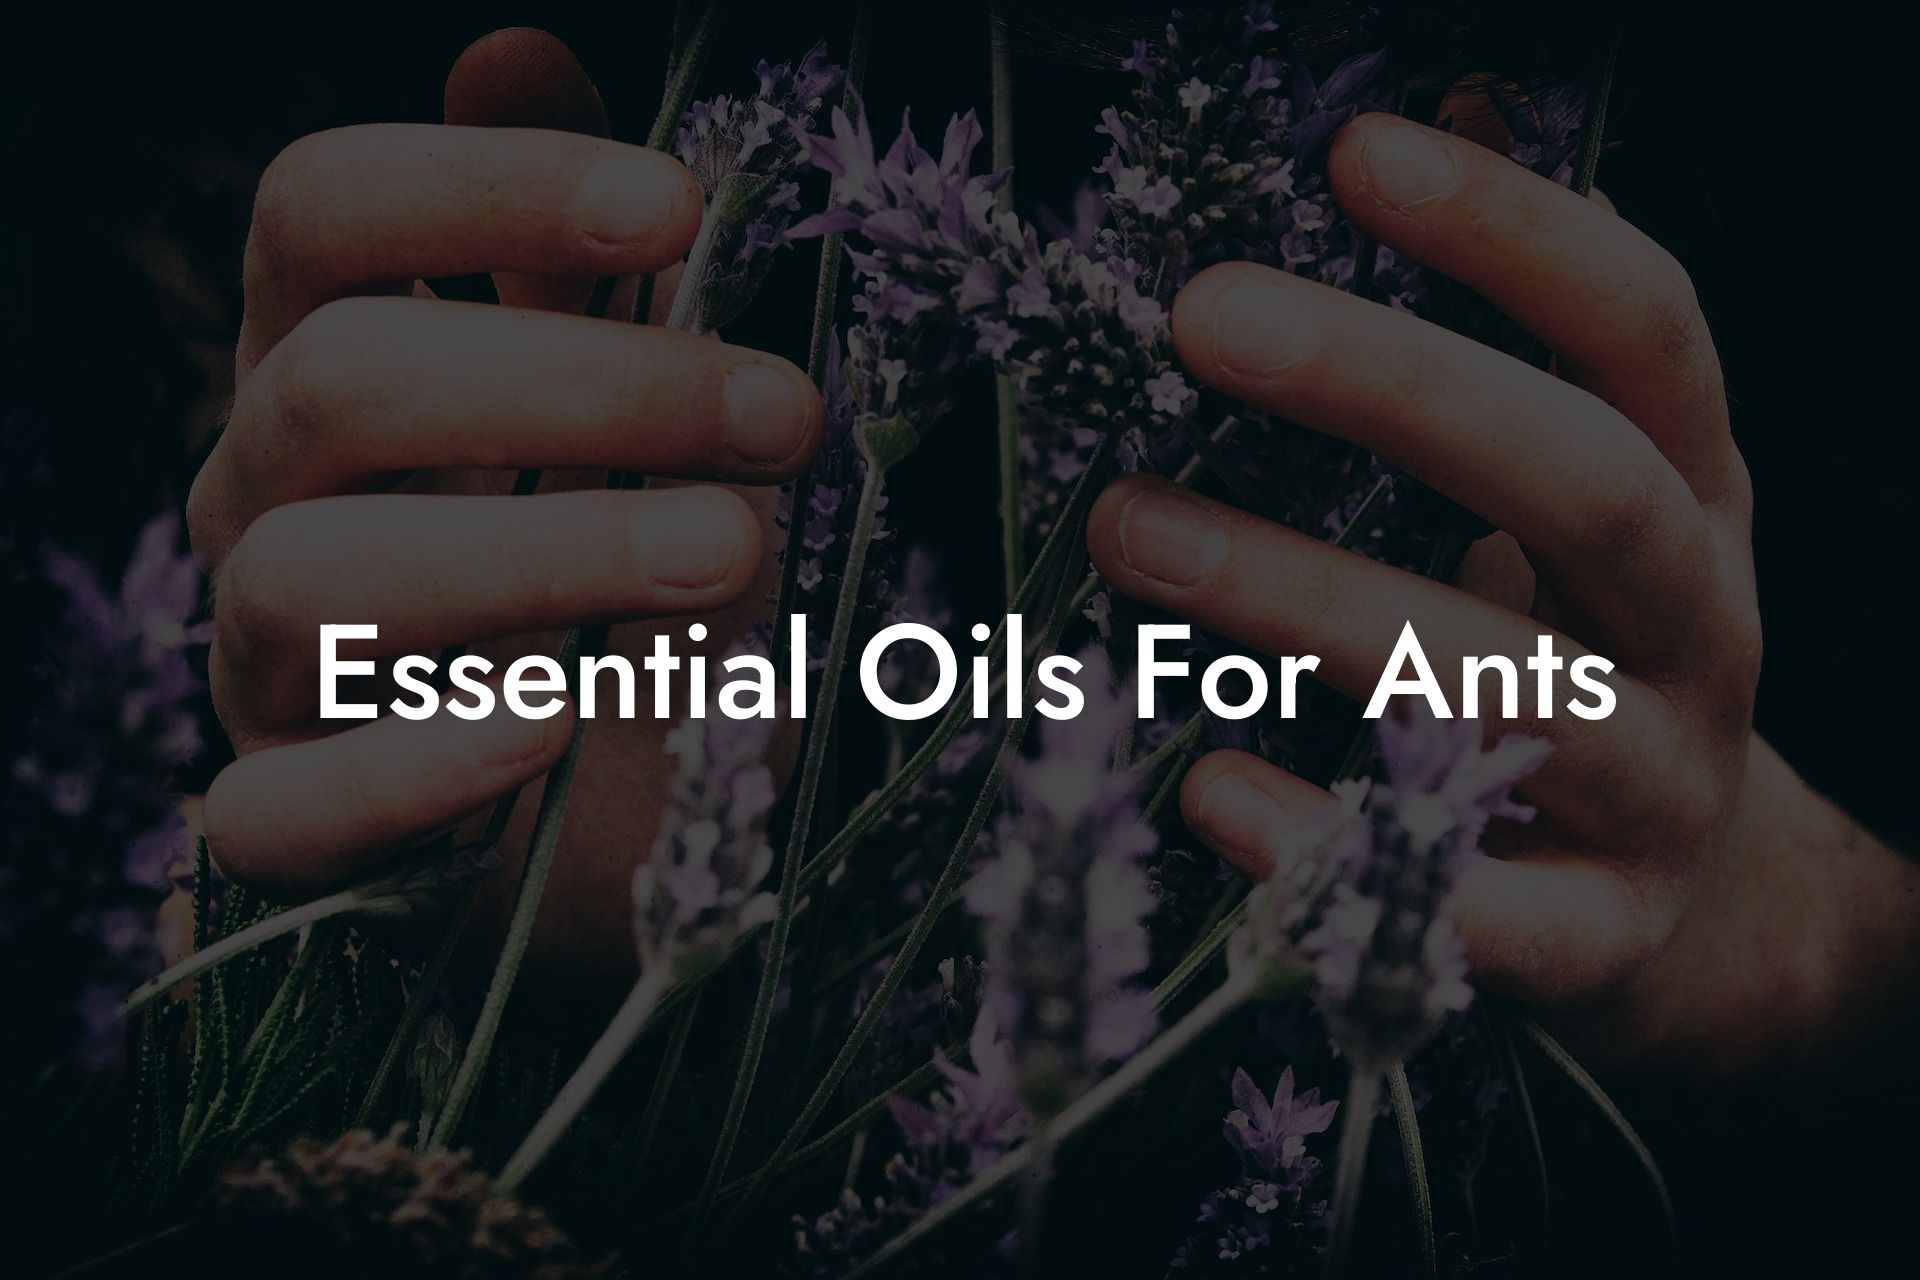 Essential Oils For Ants